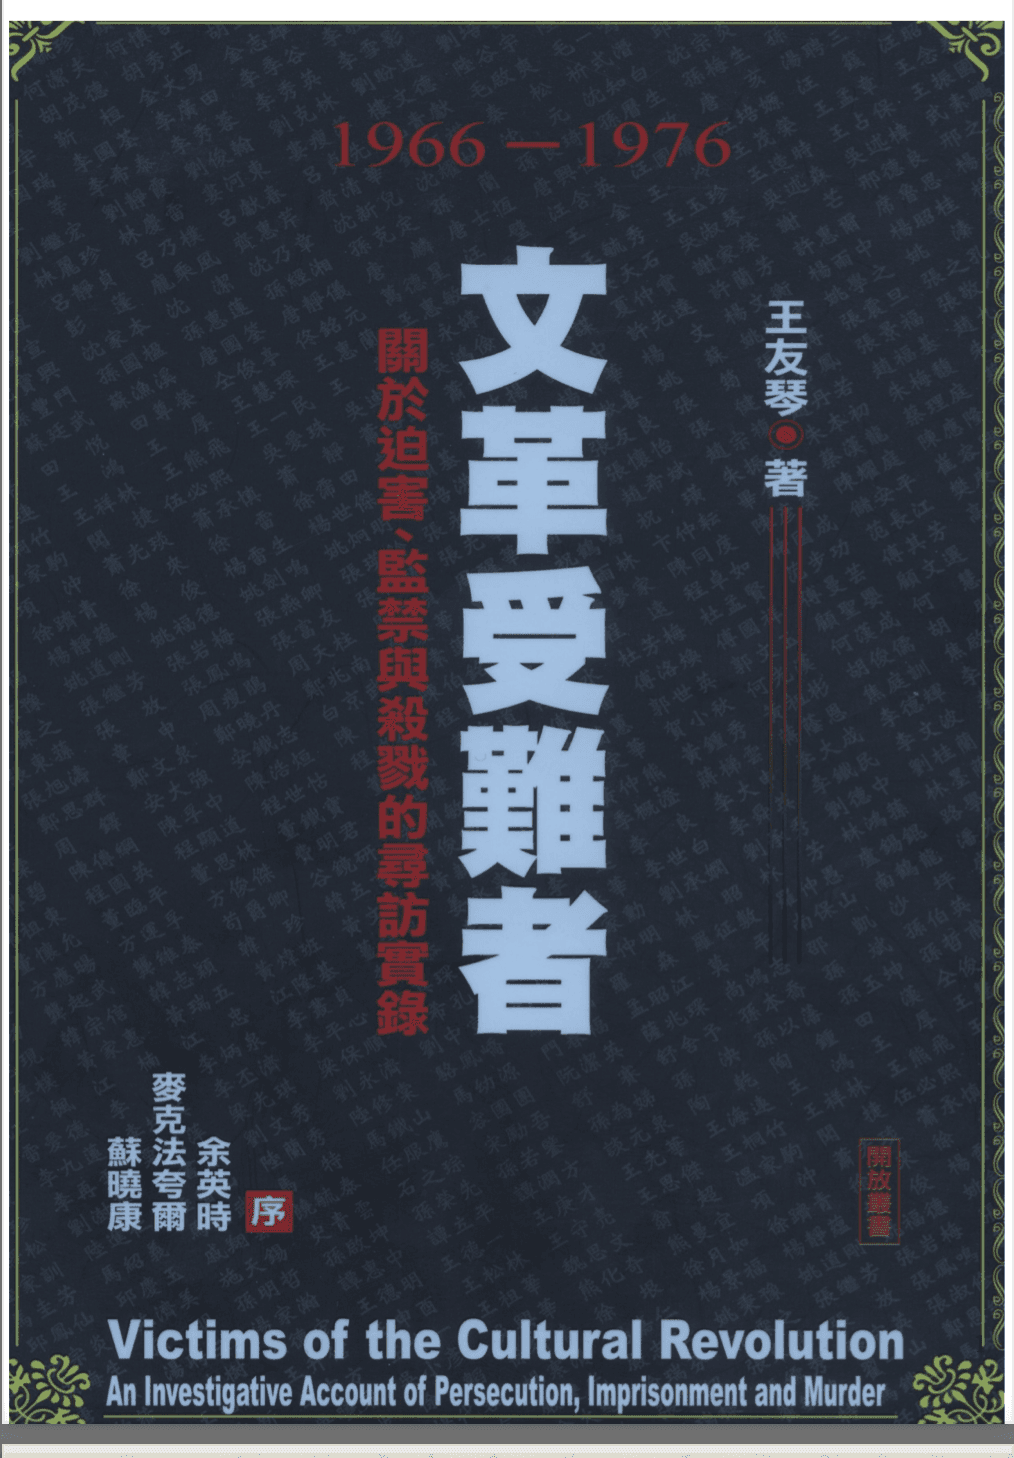 The cover page of professor Wang Youqin's book "Victims of the Cultural Revolution." (Courtesy of Wang Youqin)